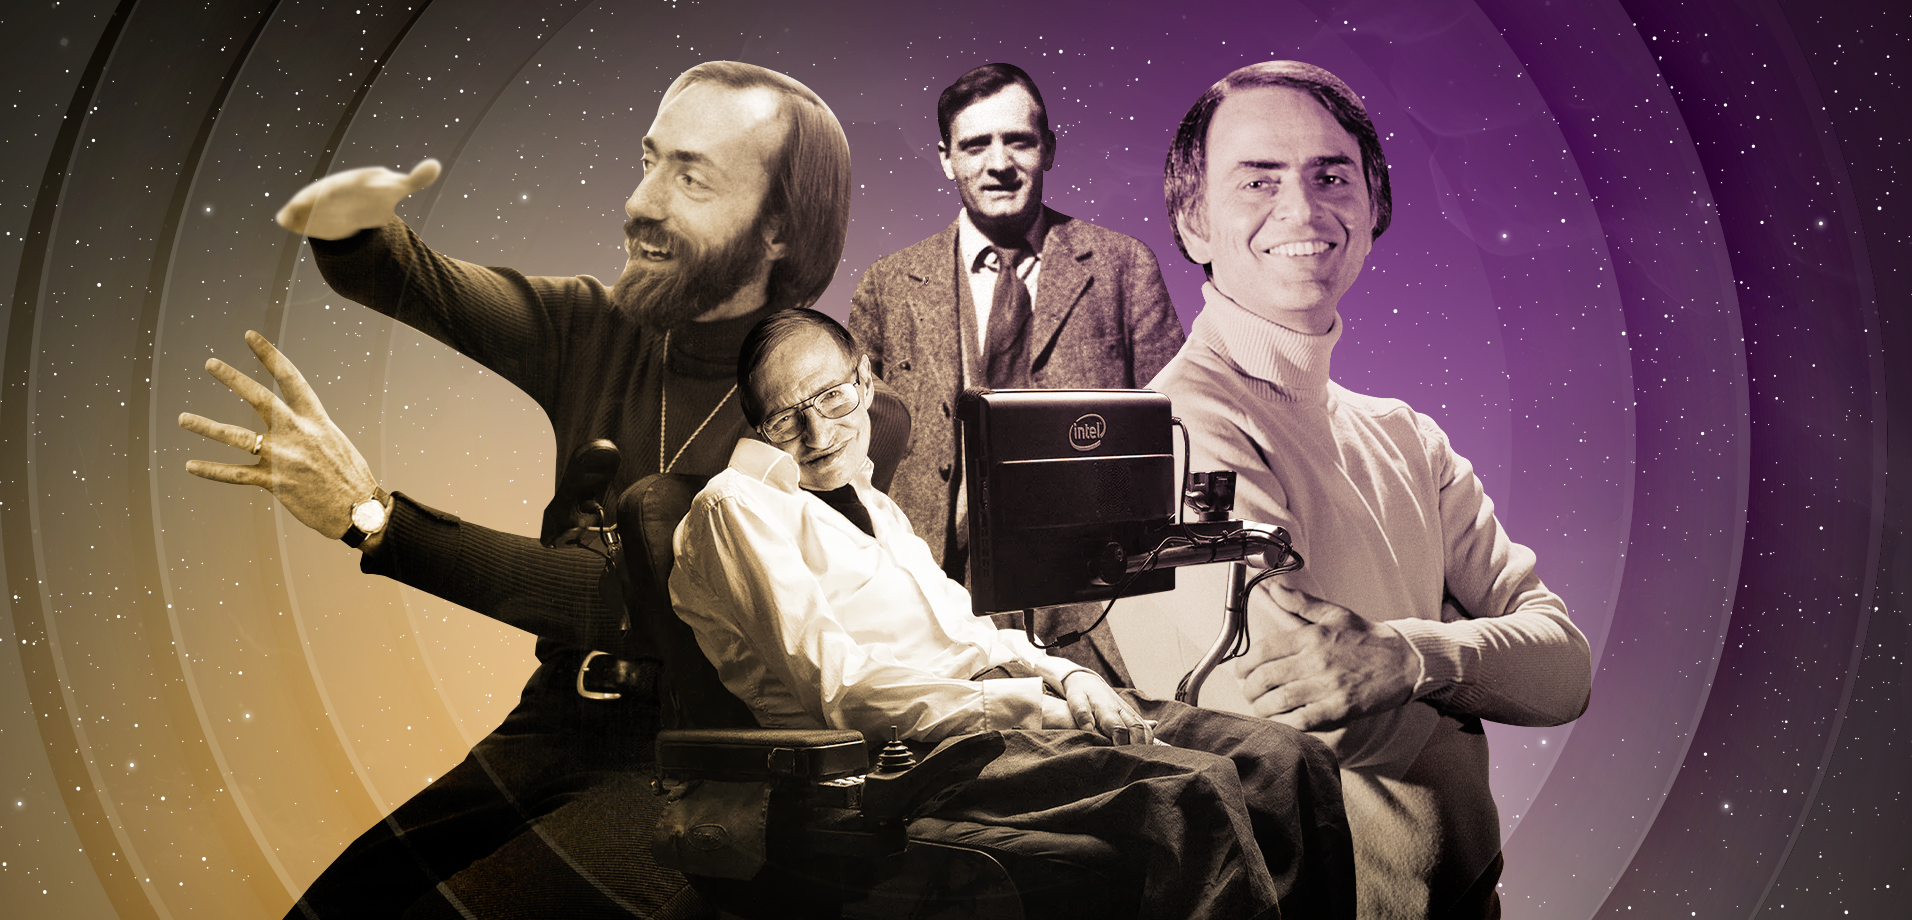 Famous Astrophysicists of All Time: The Great Scientists Who Unlocked the Mysteries of the Universe